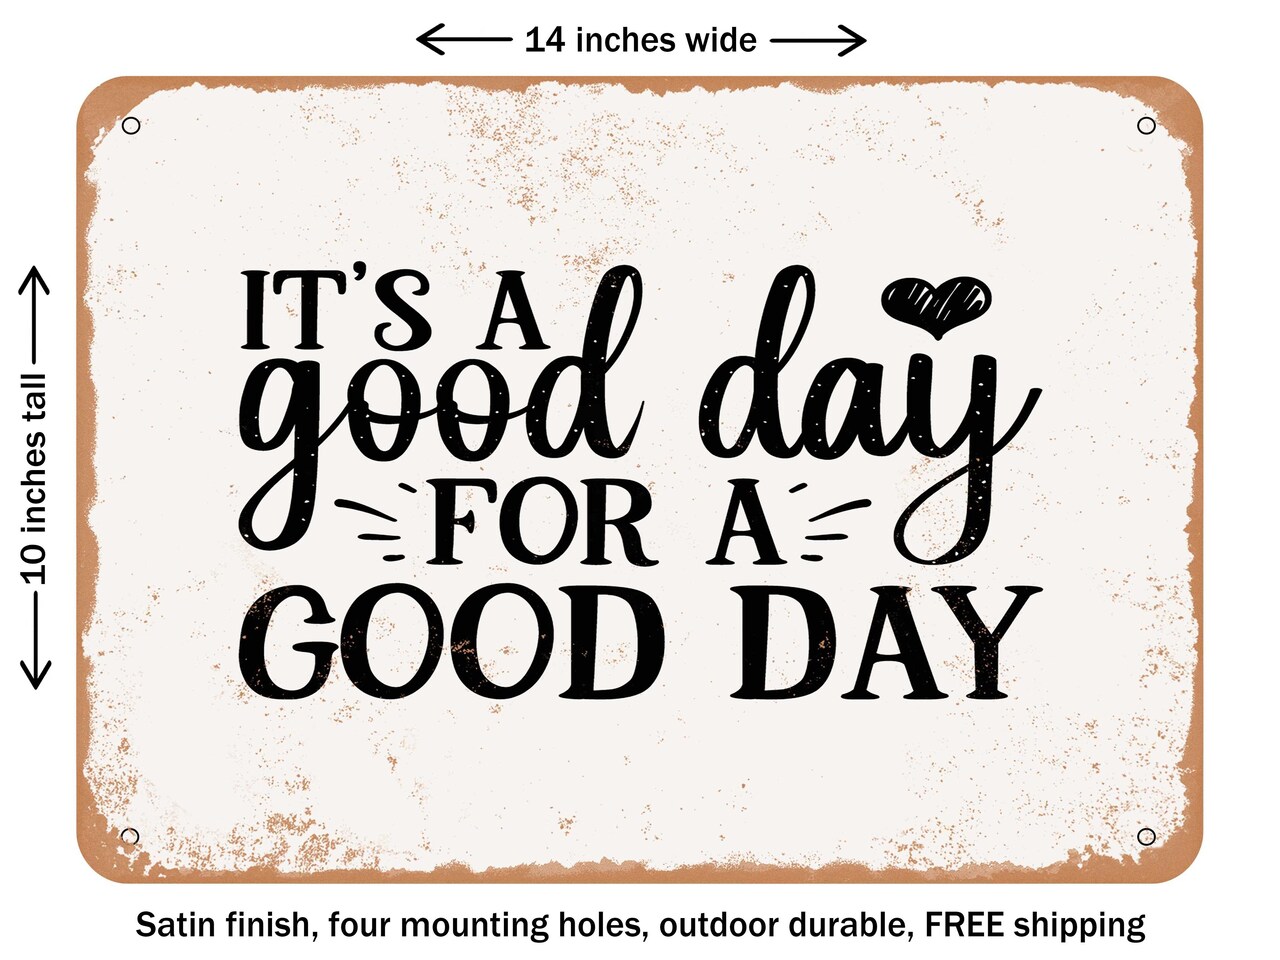 DECORATIVE METAL SIGN - Its a Good Day For a Good Day - Vintage Rusty Look